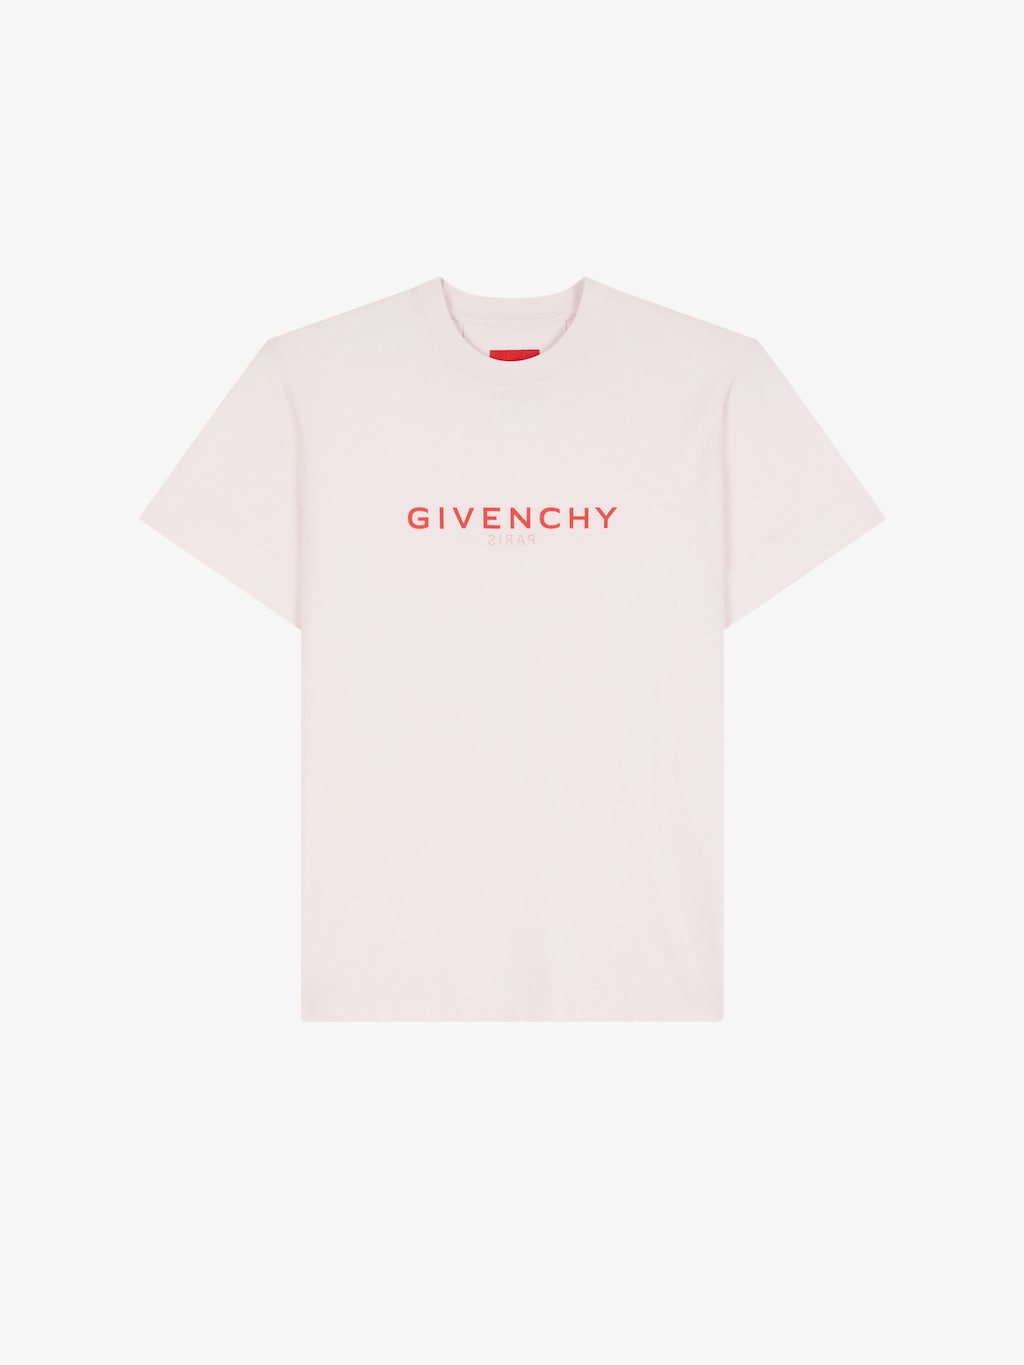 Ready to Wear Givenchy for Women | GIVENCHY Paris